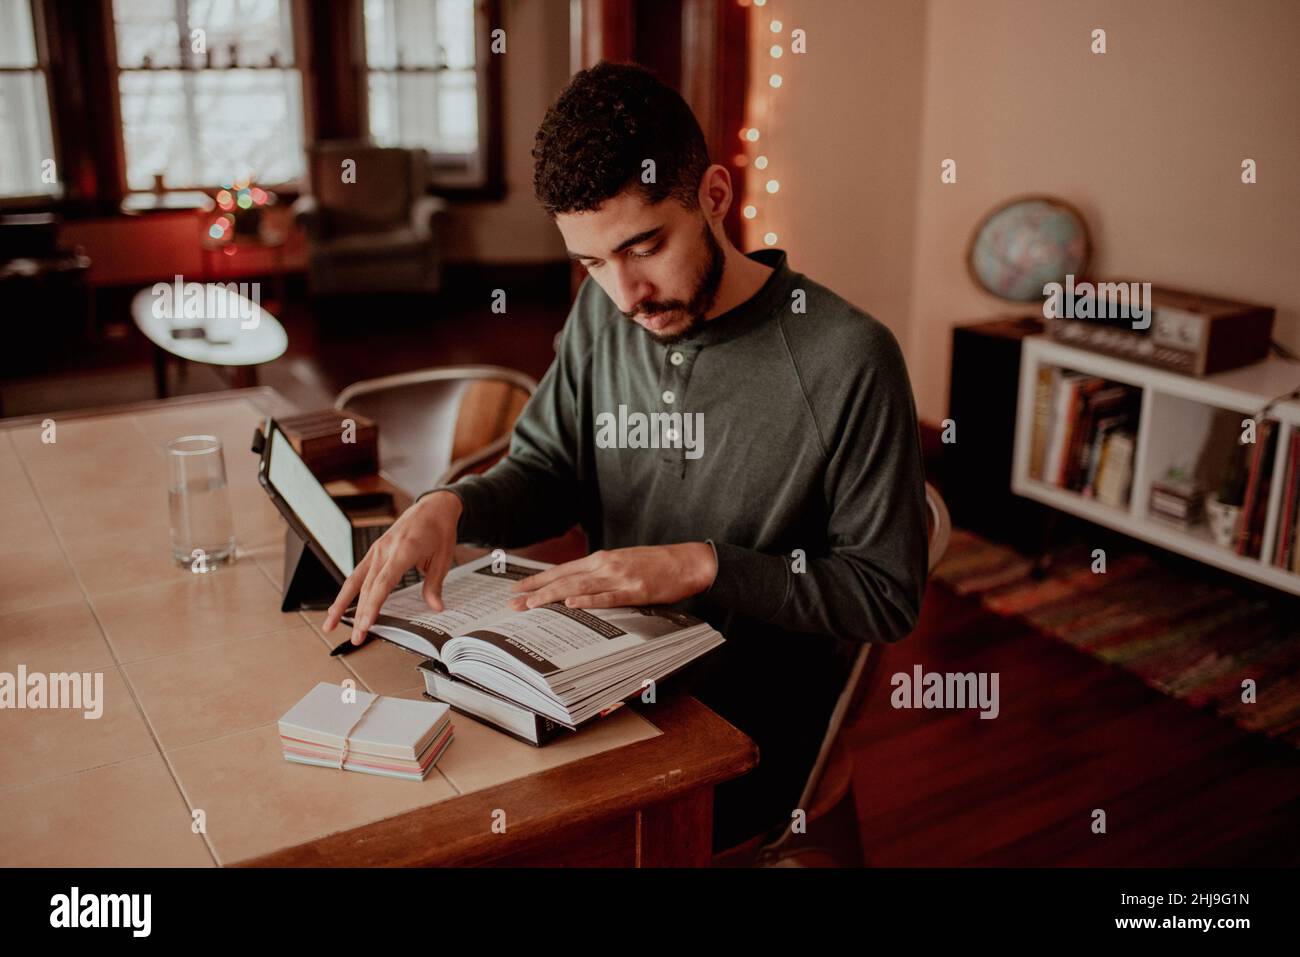 Mixed-race millenial fit man in green long sleeve preps to game master a tabletop fantasy roleplaying game with friends, studying game manual to prep Stock Photo